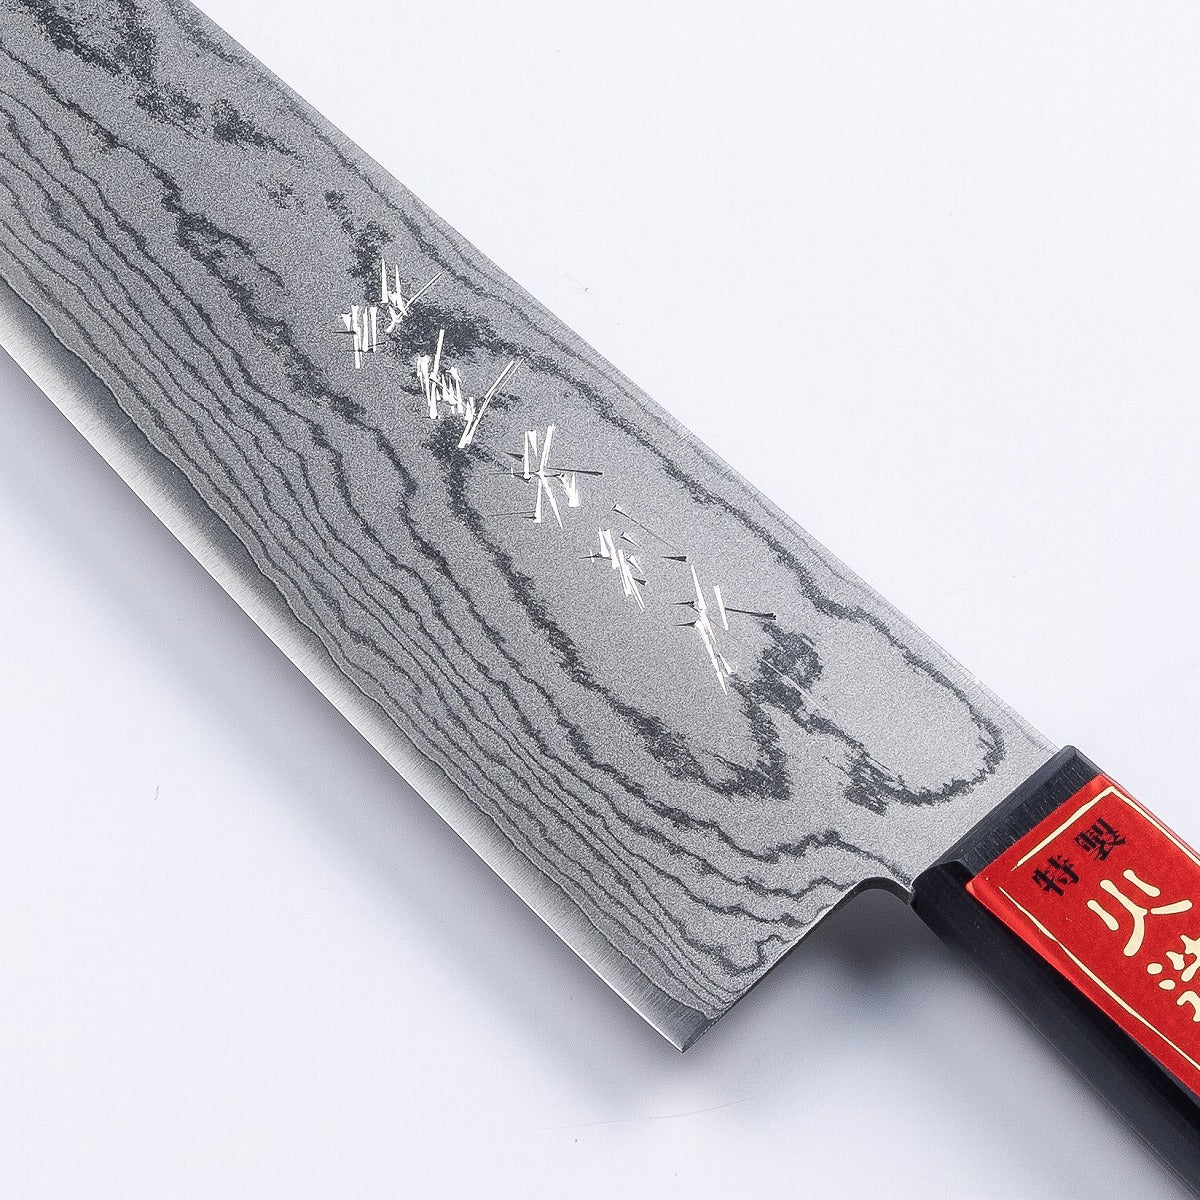 "SHIGEHIRO SPECIAL" Gyuto Special Edition (Chef's Knife) VG10 Damascus, 210mm